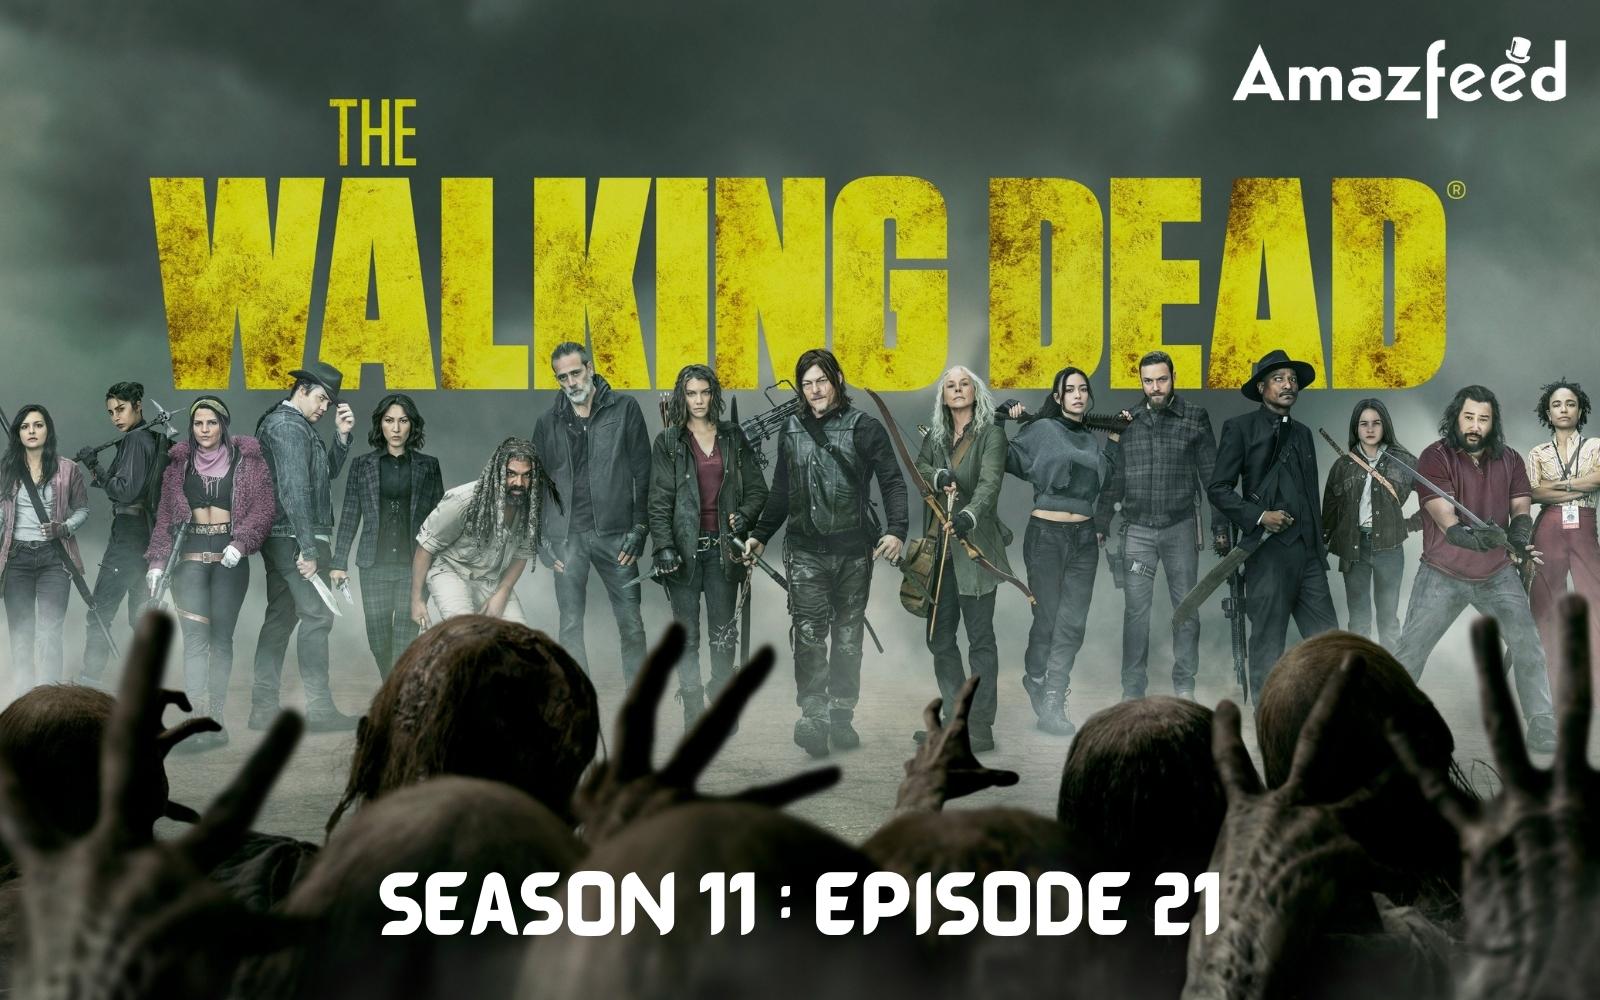 The Walking Dead Season 11 Episode 21 'Outpost 22' : Preview, Where to Watch, Speculation, Countdown & Trailer